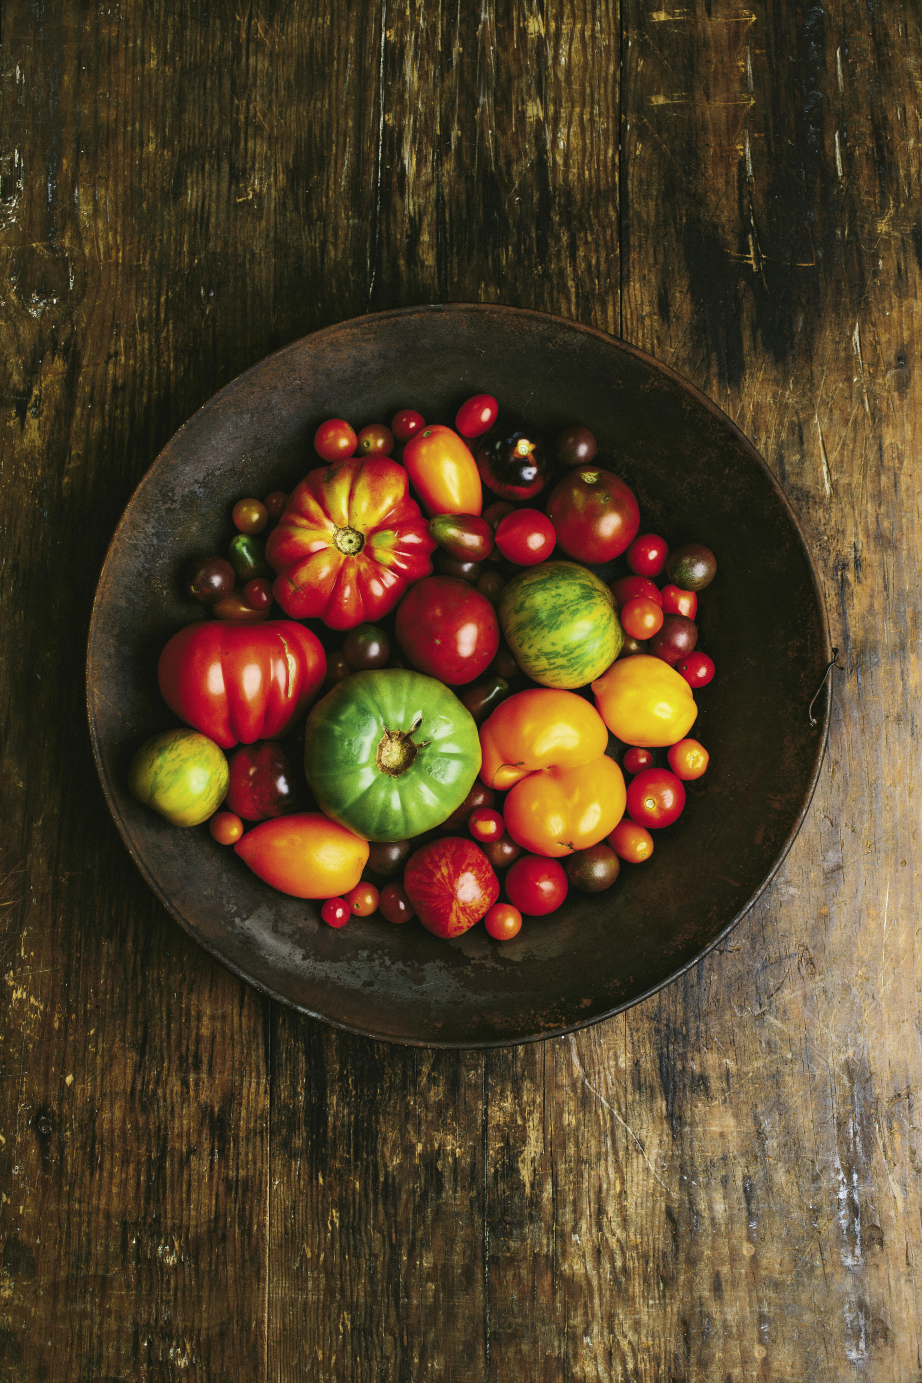 Summer’s Bounty:  A bowlful of locally grown heirlooms,  including the large red Costoluto Genovese, the striped red Tigerella and Green Zebras, and Orange Bananas